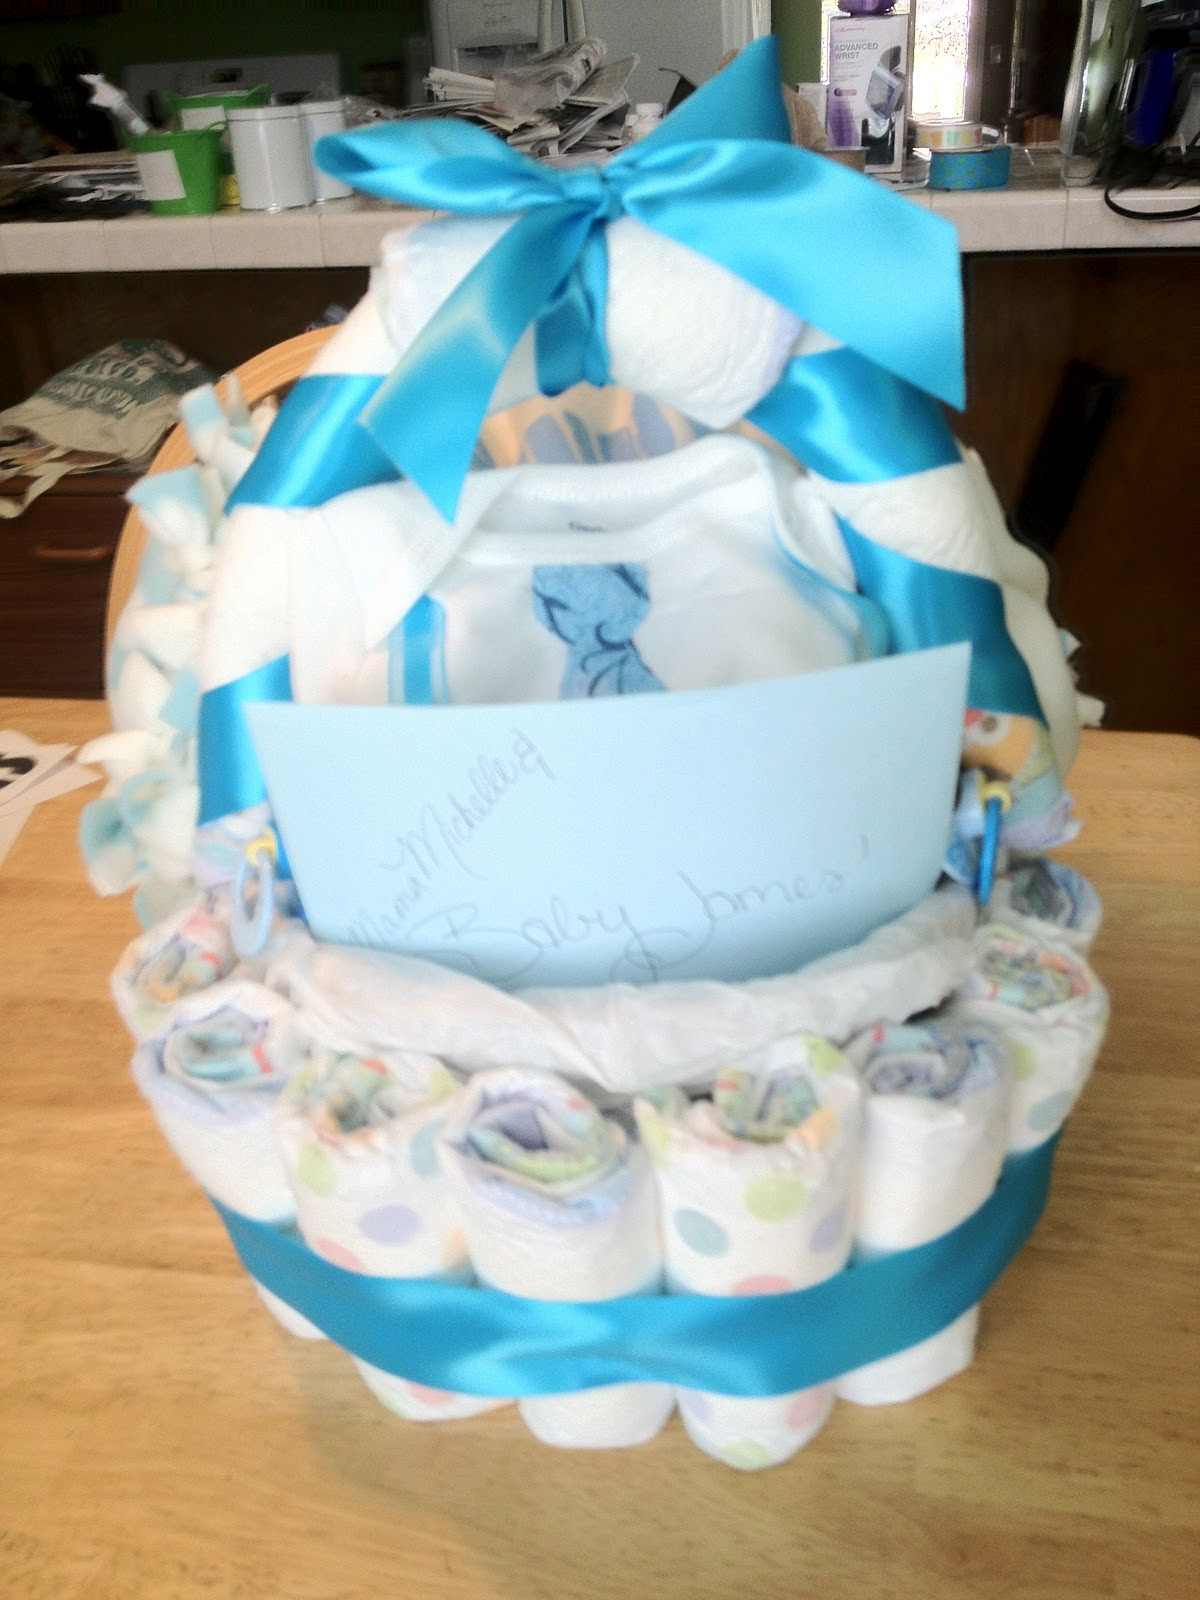 Ideas For Baby Shower Gift Baskets
 Someday Baby Diaper Basket Baby Shower